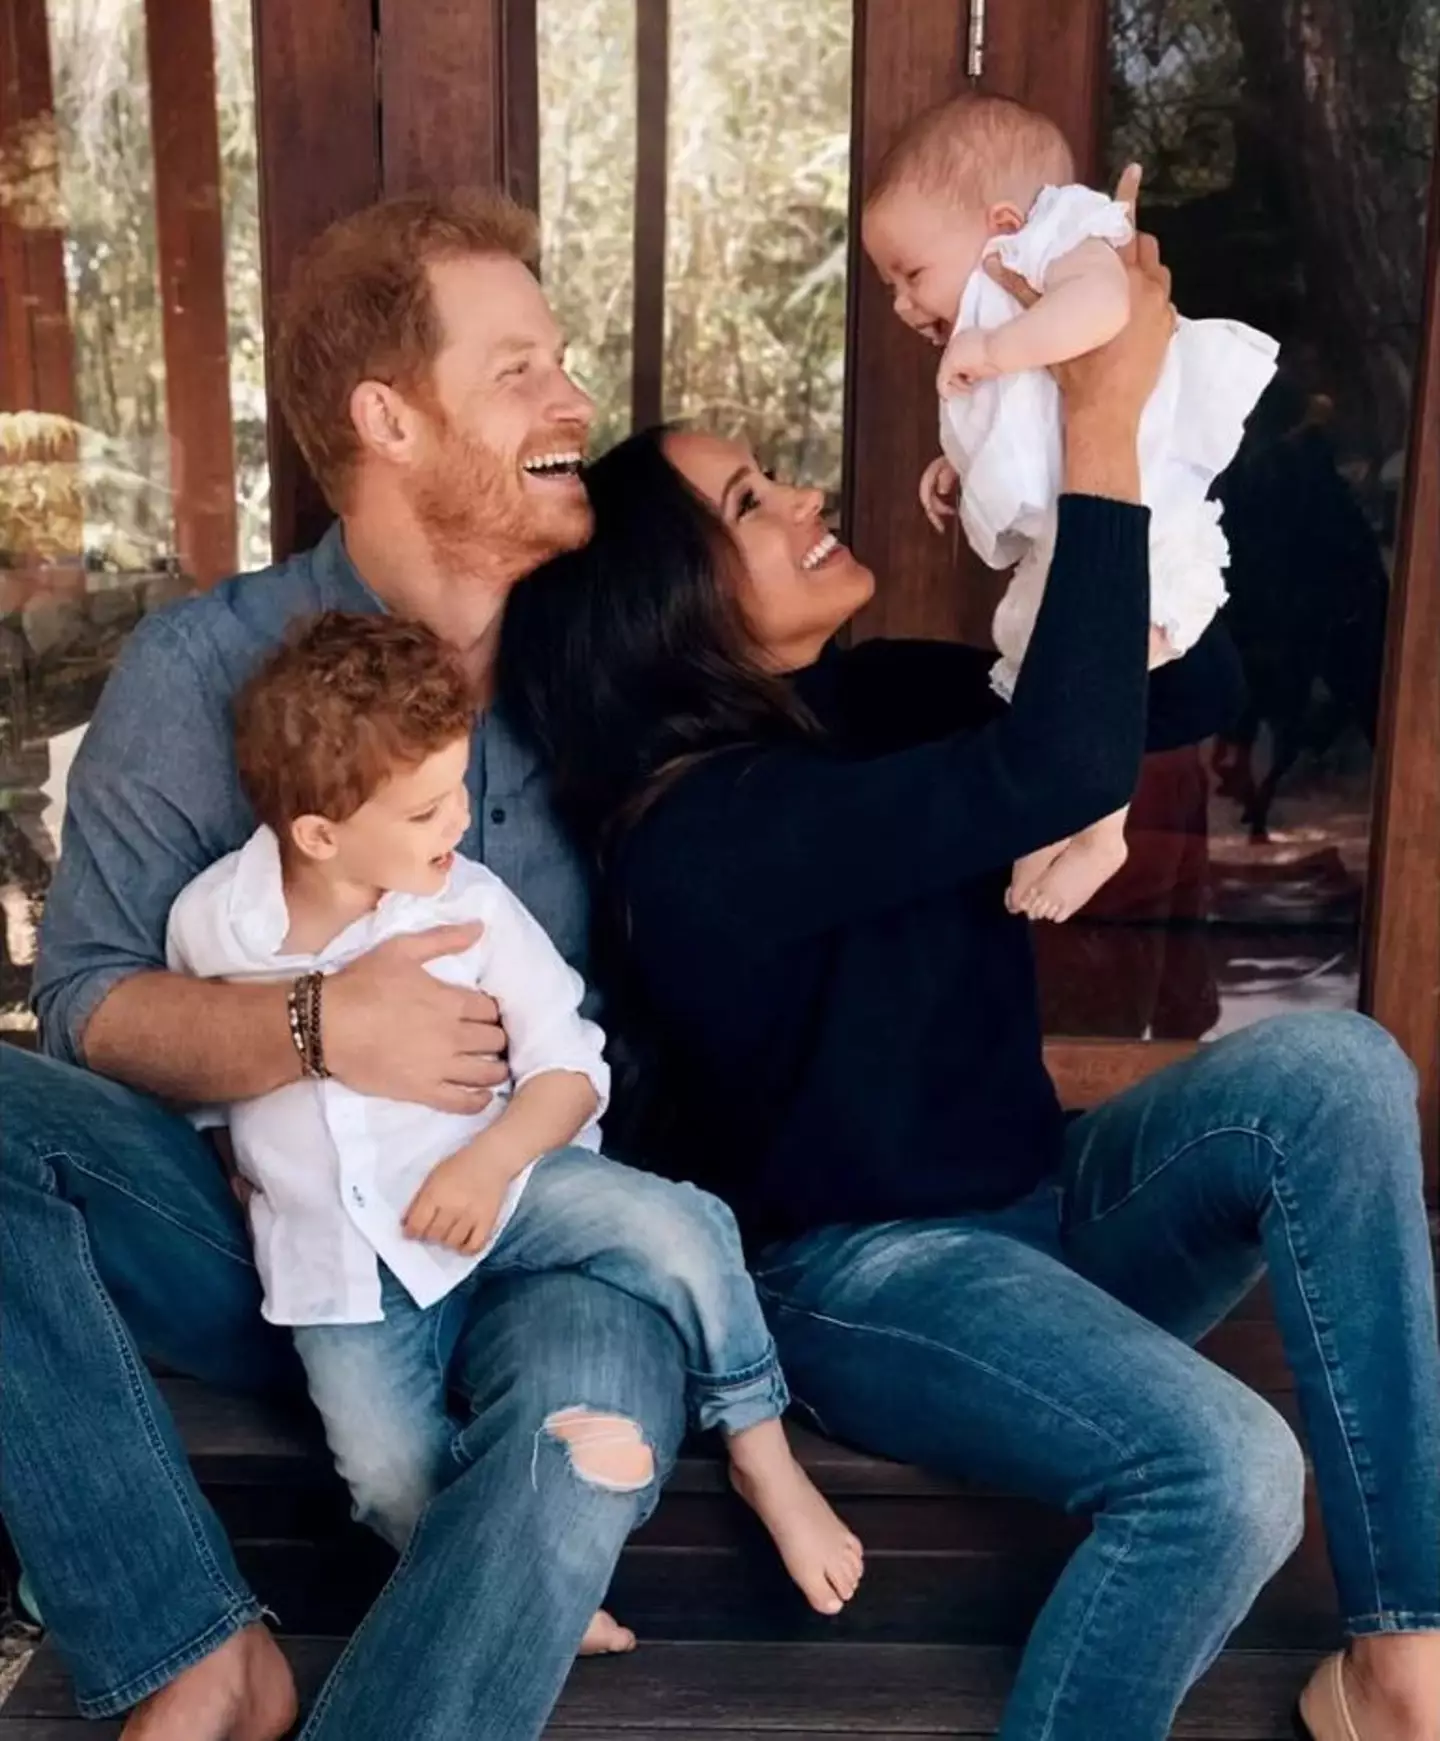 Prince Harry and Meghan Markle opted for jeans in this year's Christmas card. (